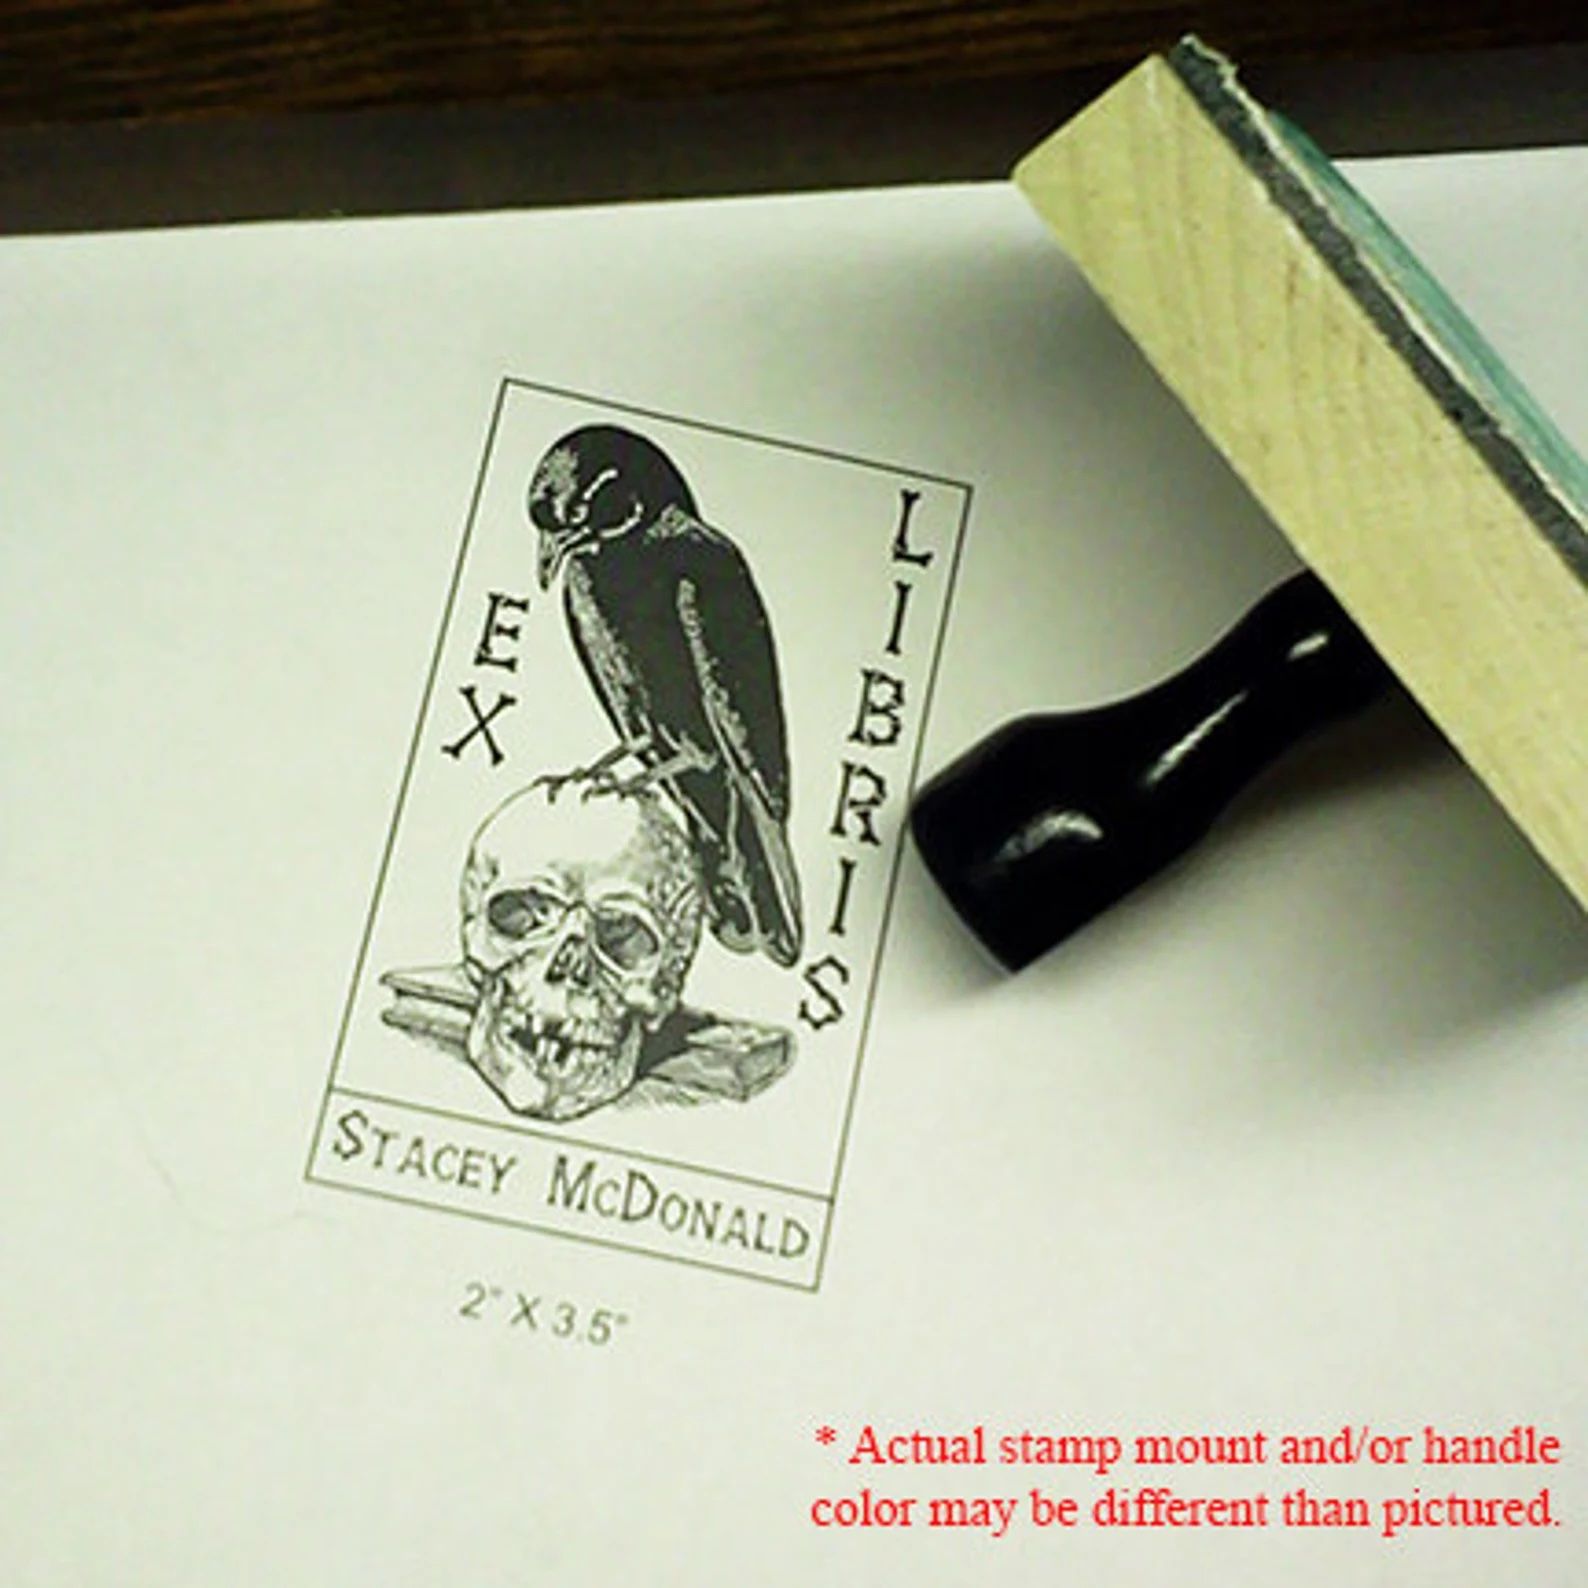 an ex libris stamp of a raven on a skull